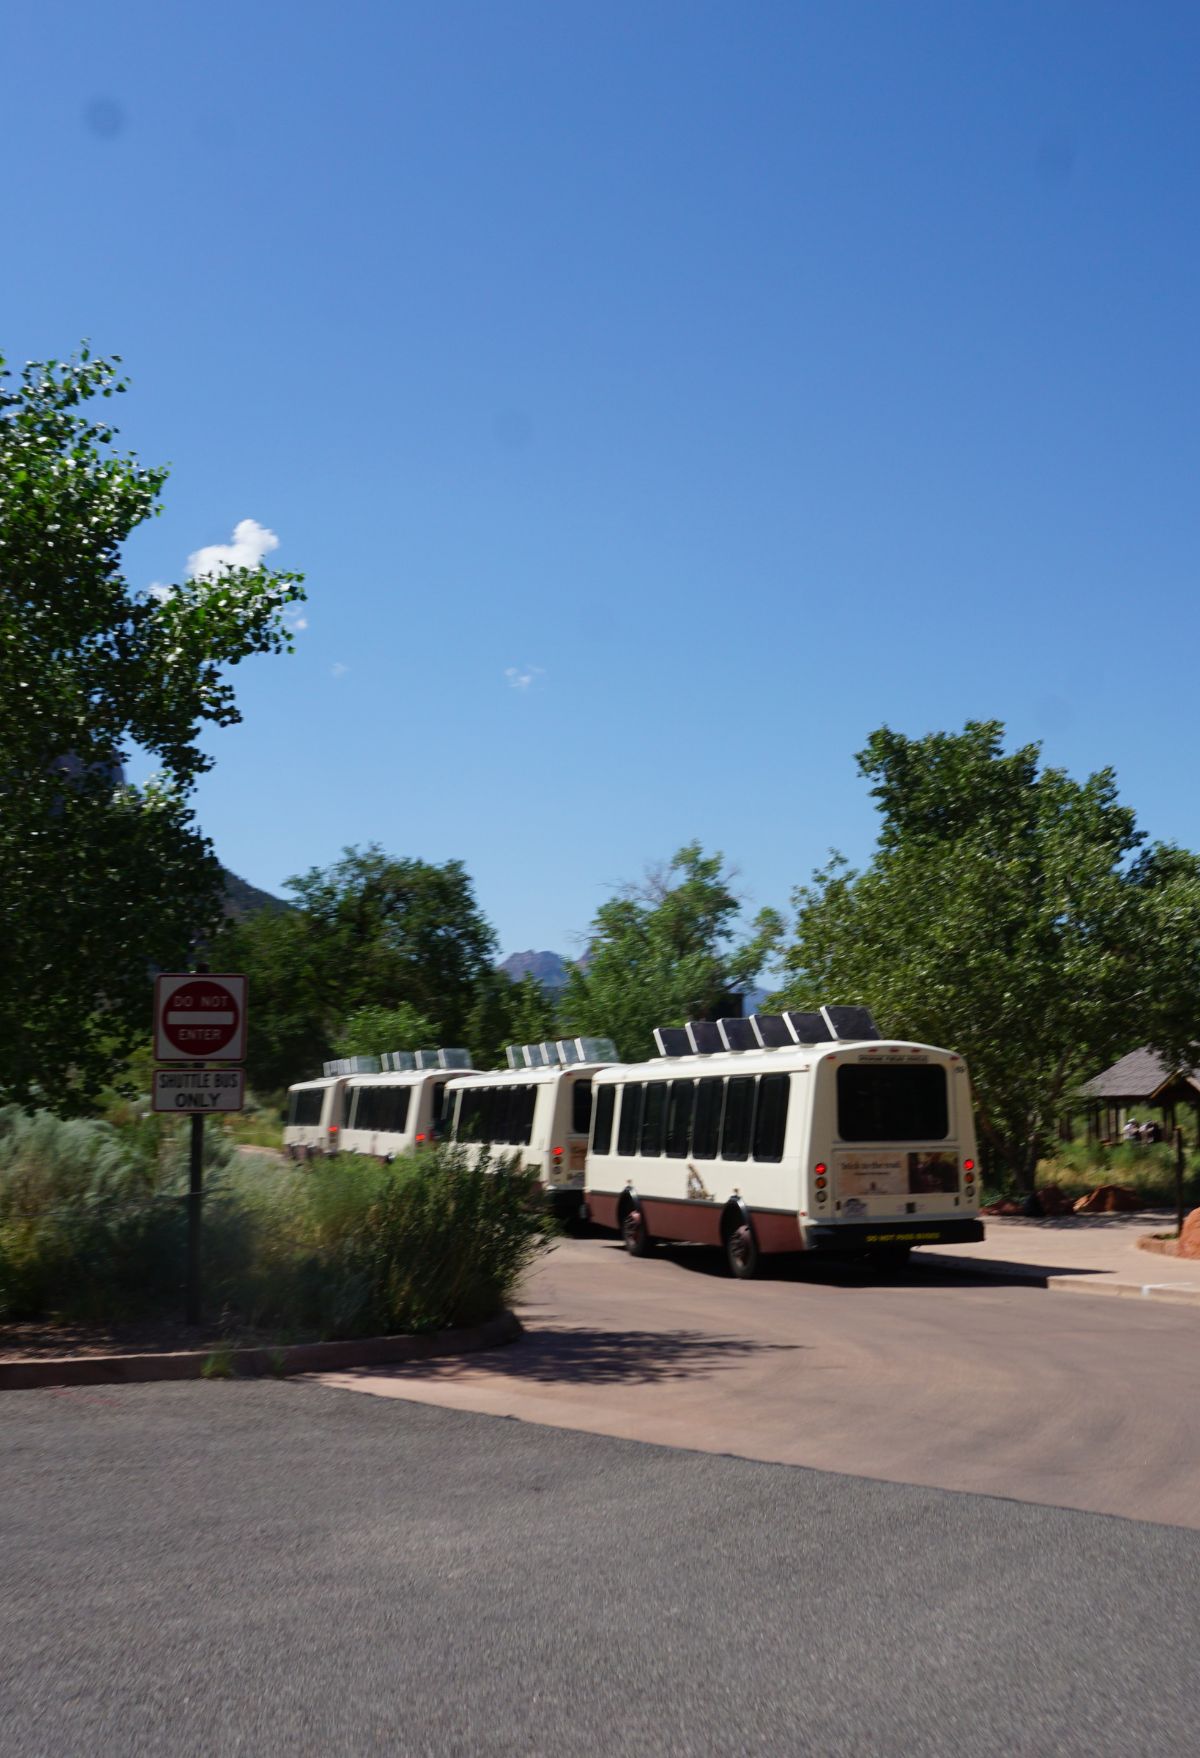 A group of buses parked in a parking lot. zion national park